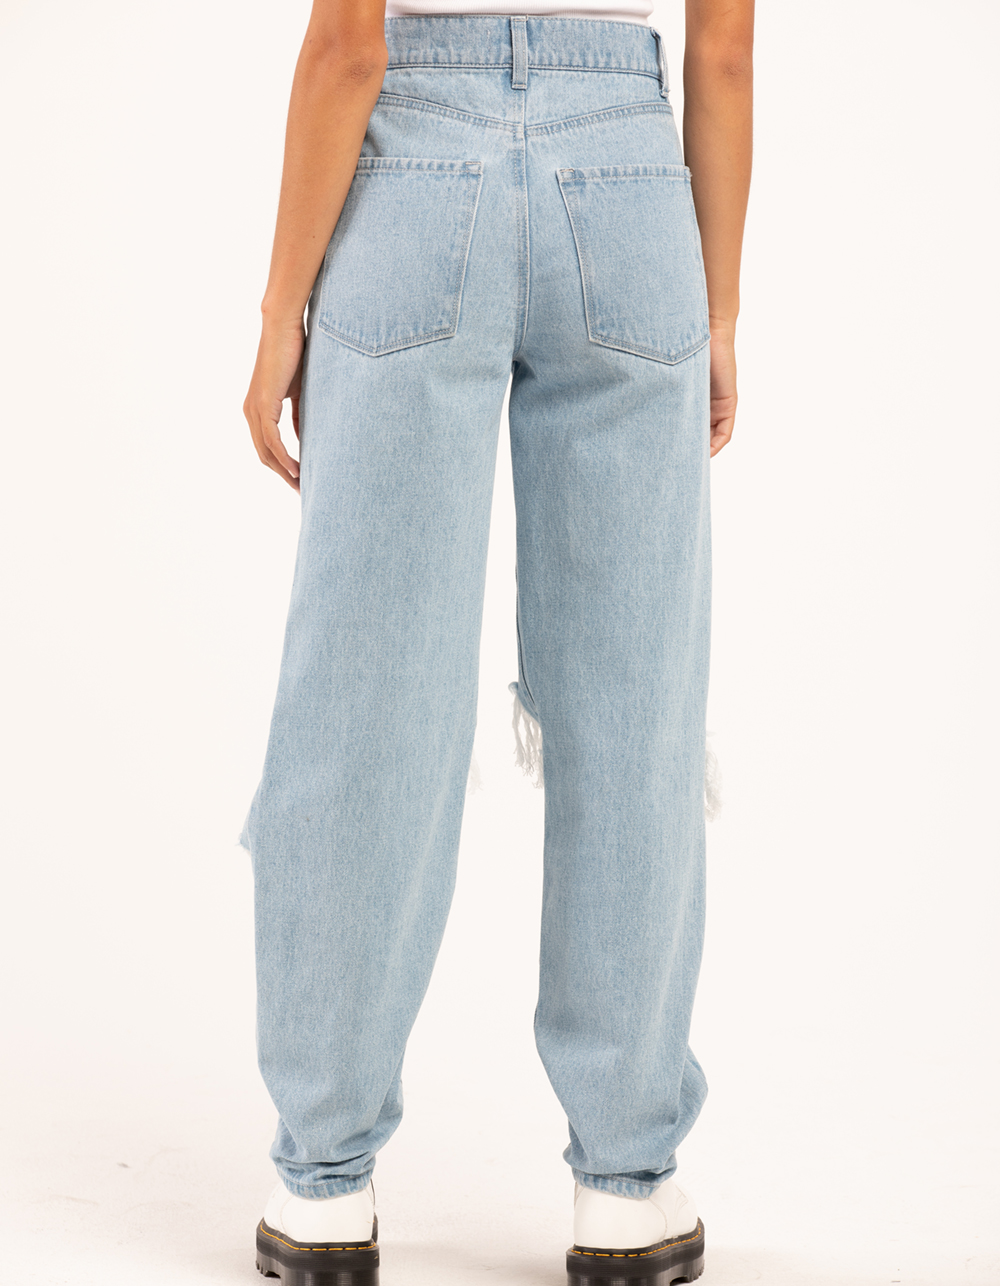 RSQ Womens High Rise Baggy Jeans - LIGHT WASH, Tillys